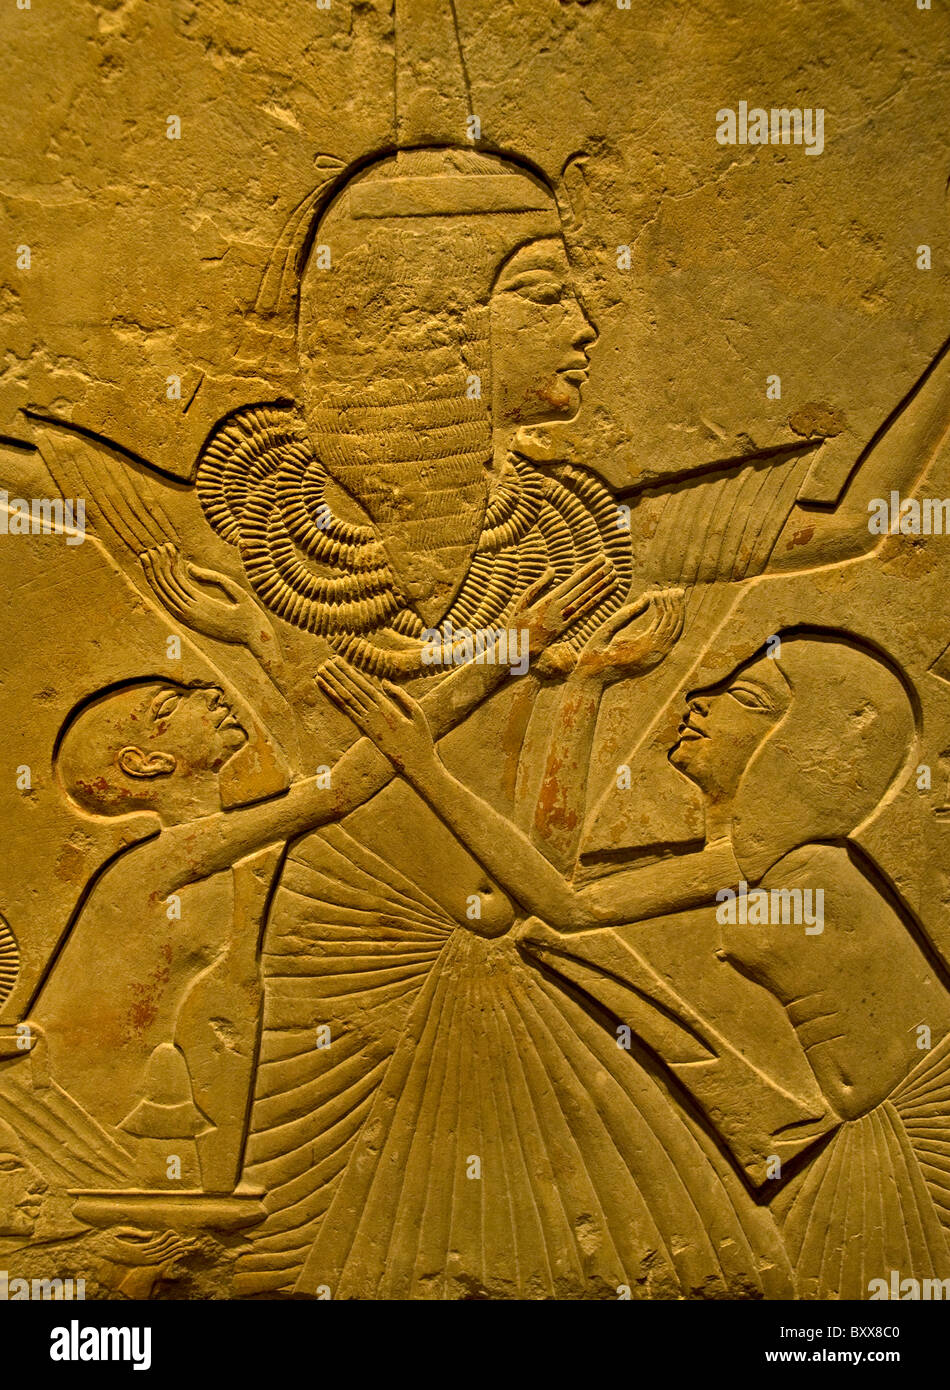 General Horemheb was the last Pharaoh of Ancient Egypt's 18th Dynasty from 1319 BC to late 1292 BC. Stock Photo